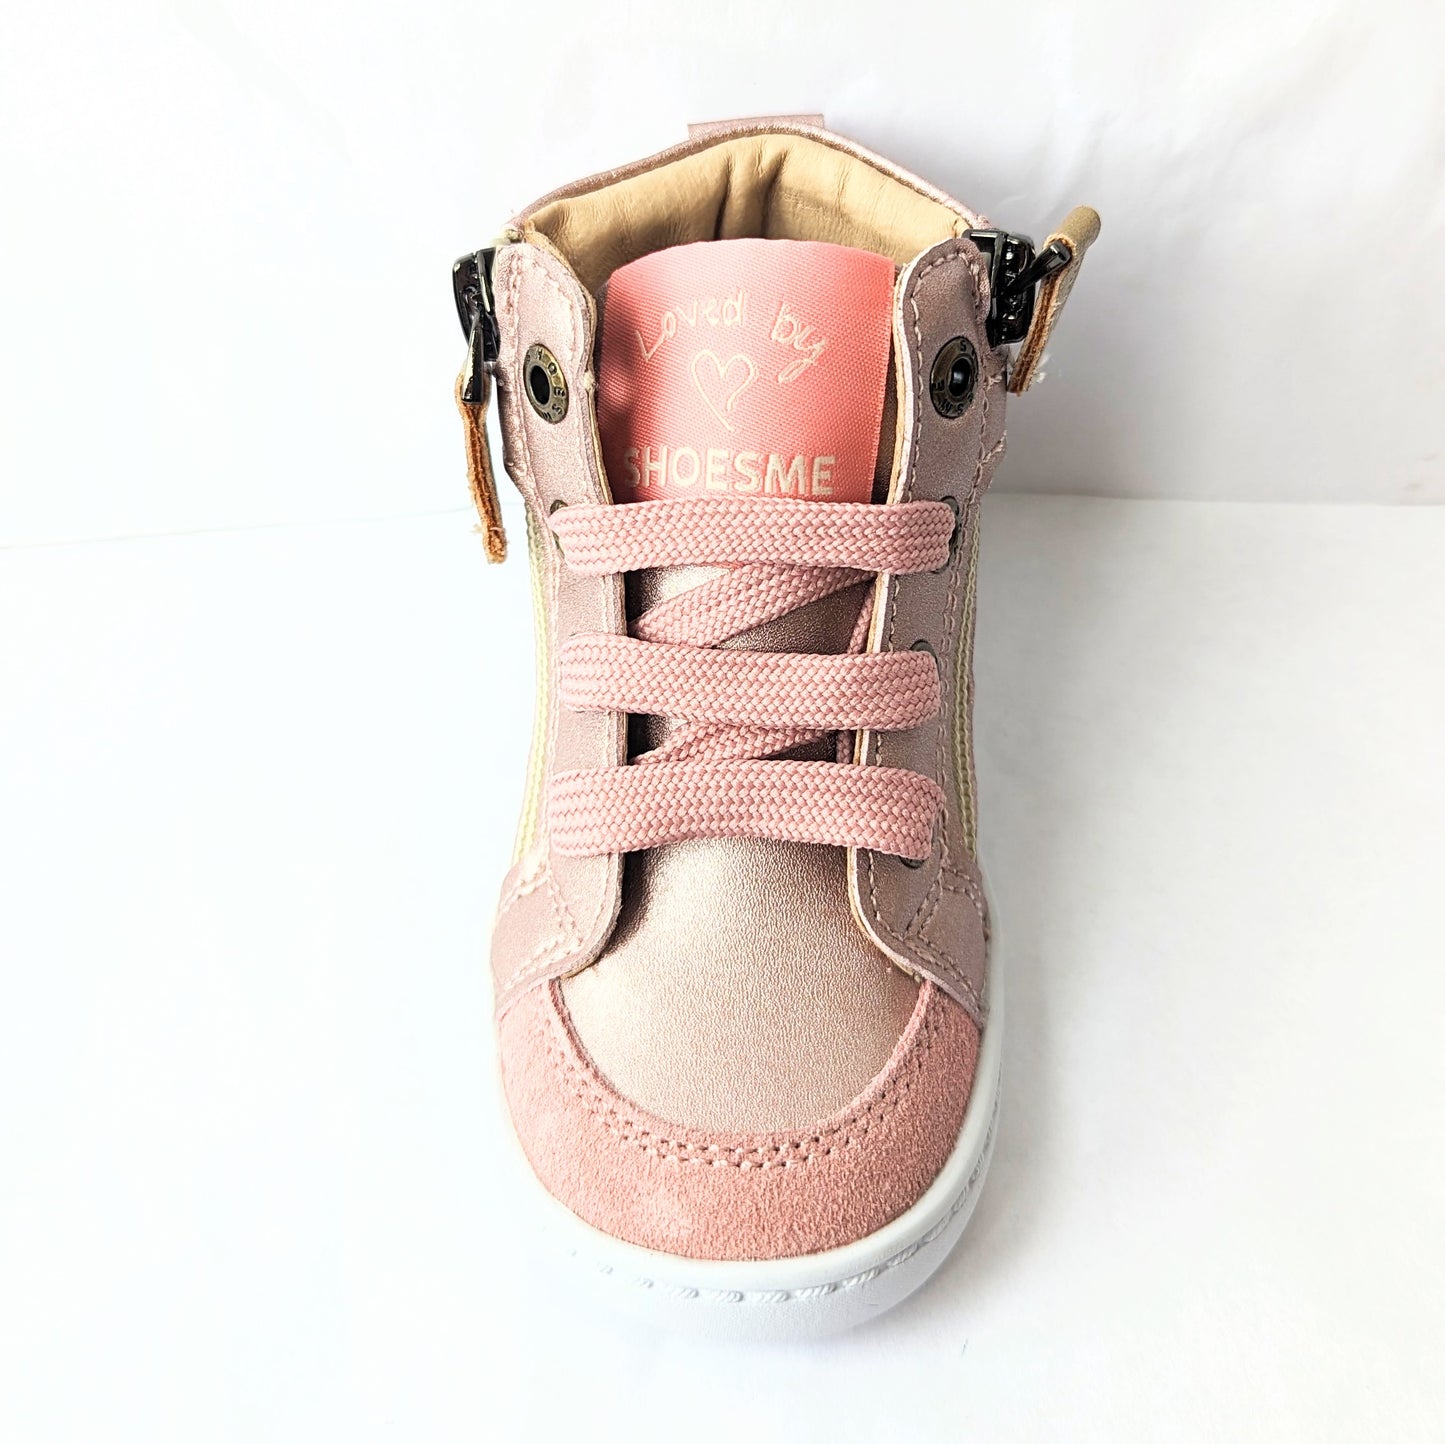 A girls hi-top boot by Shoesme, style FL23W008-B, in rose gold floral leather and suede with detachable teddy bear and lace and zip fastening.  Front view.